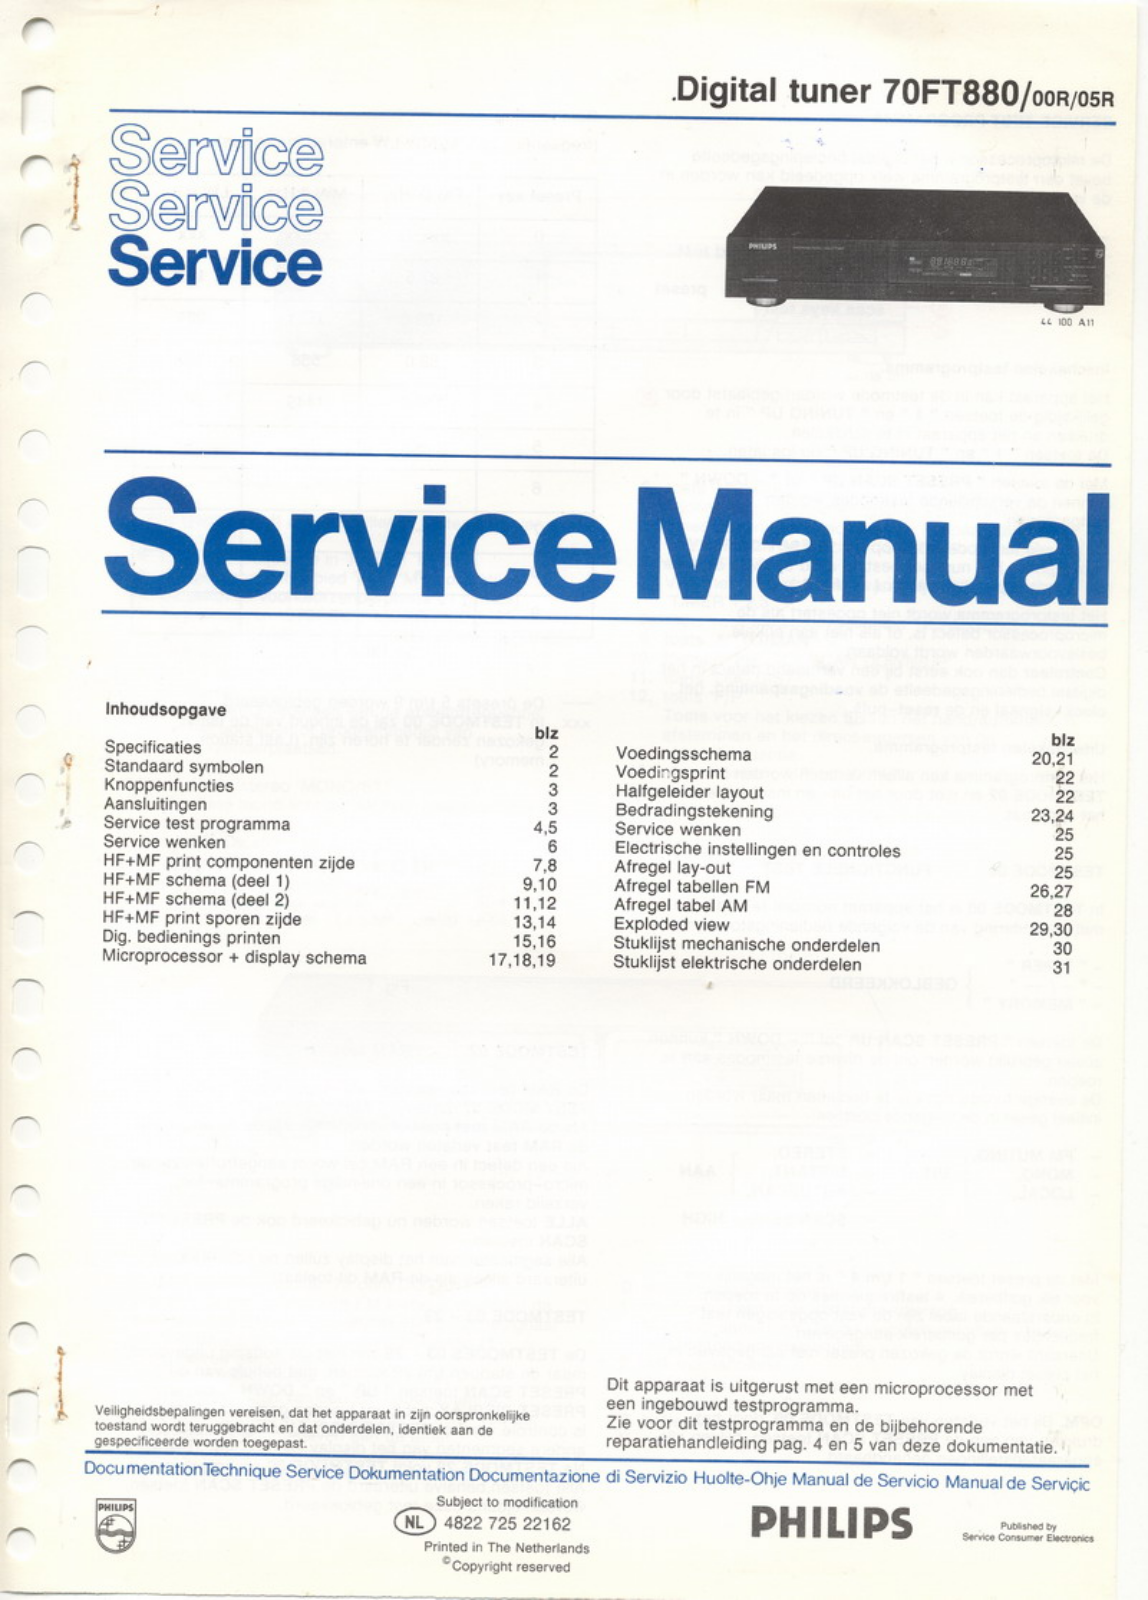 Philips FT-880 Service manual